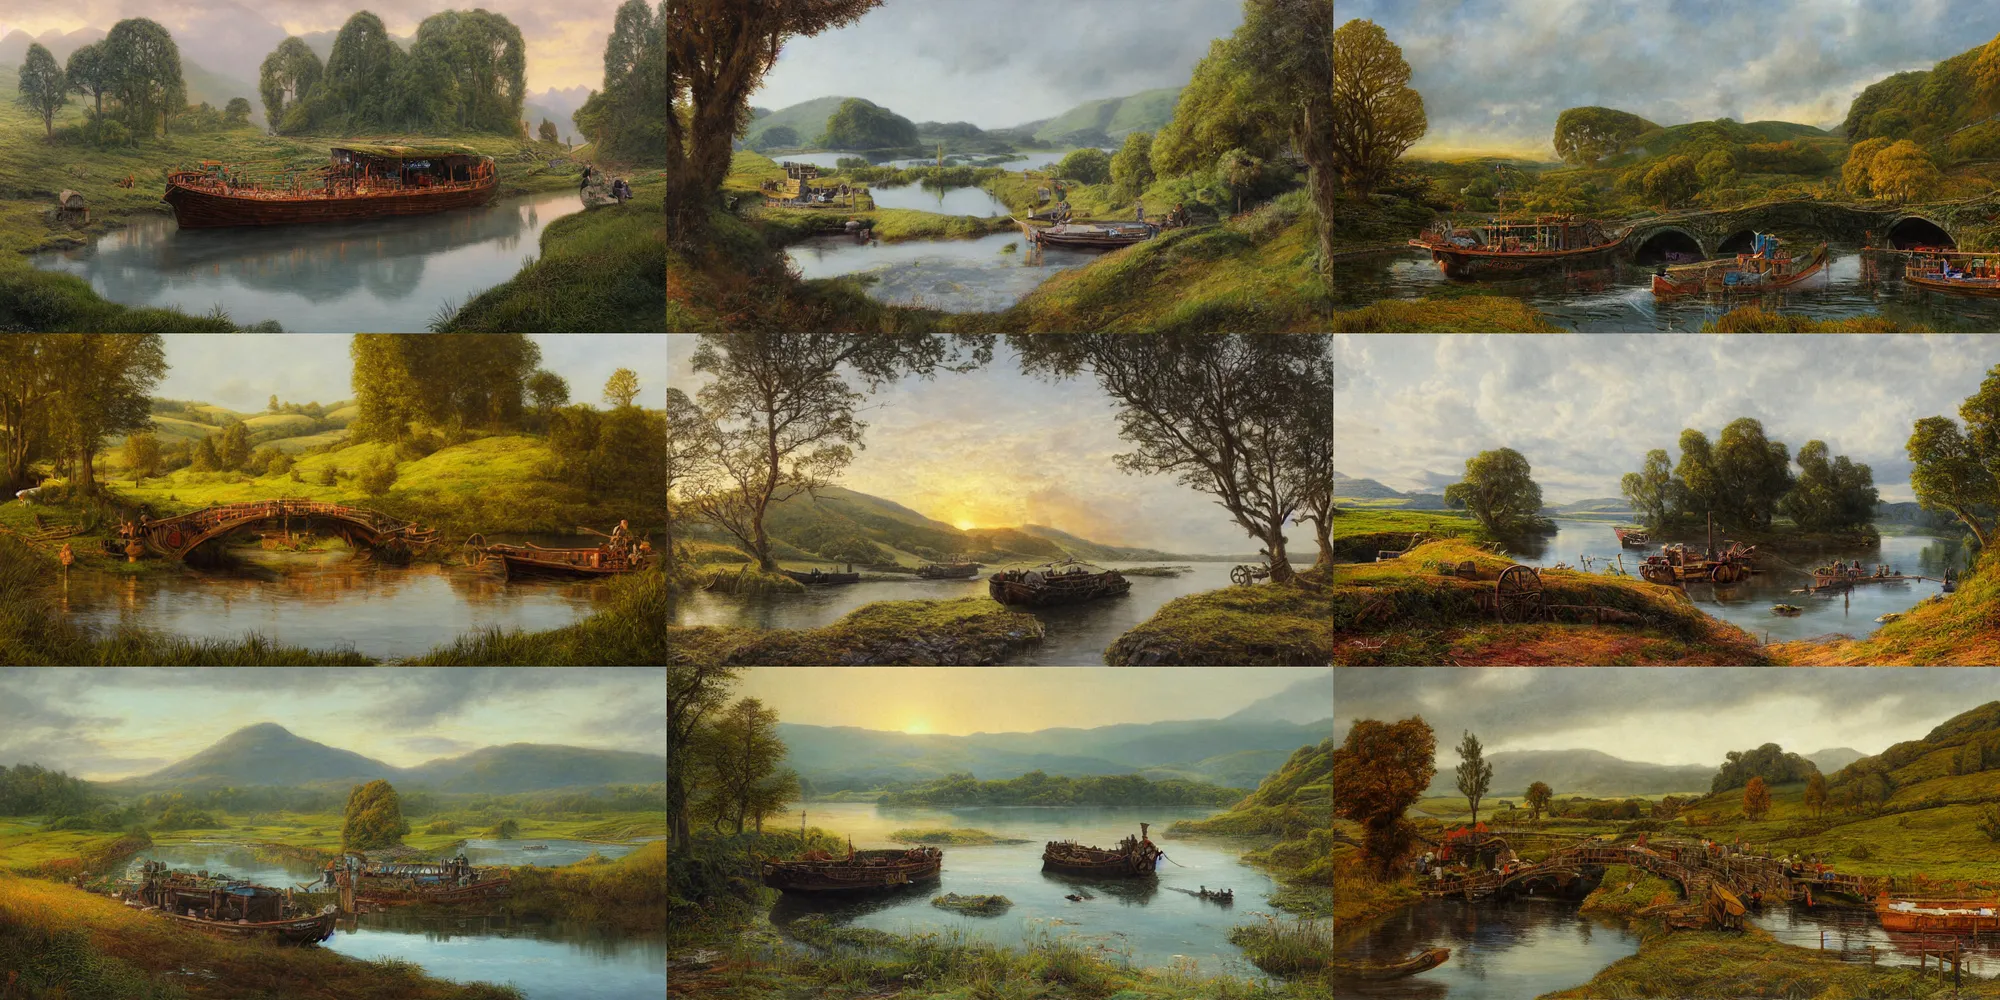 Prompt: bucklebury ferry, left side shows a flat wooden ferry loaded with goods, by alan lee, side shows mirror like water on a great river, rolling hills and hobbit holes in the background, sunrise, concept art, detailed trees in bloom, art station, oil painting